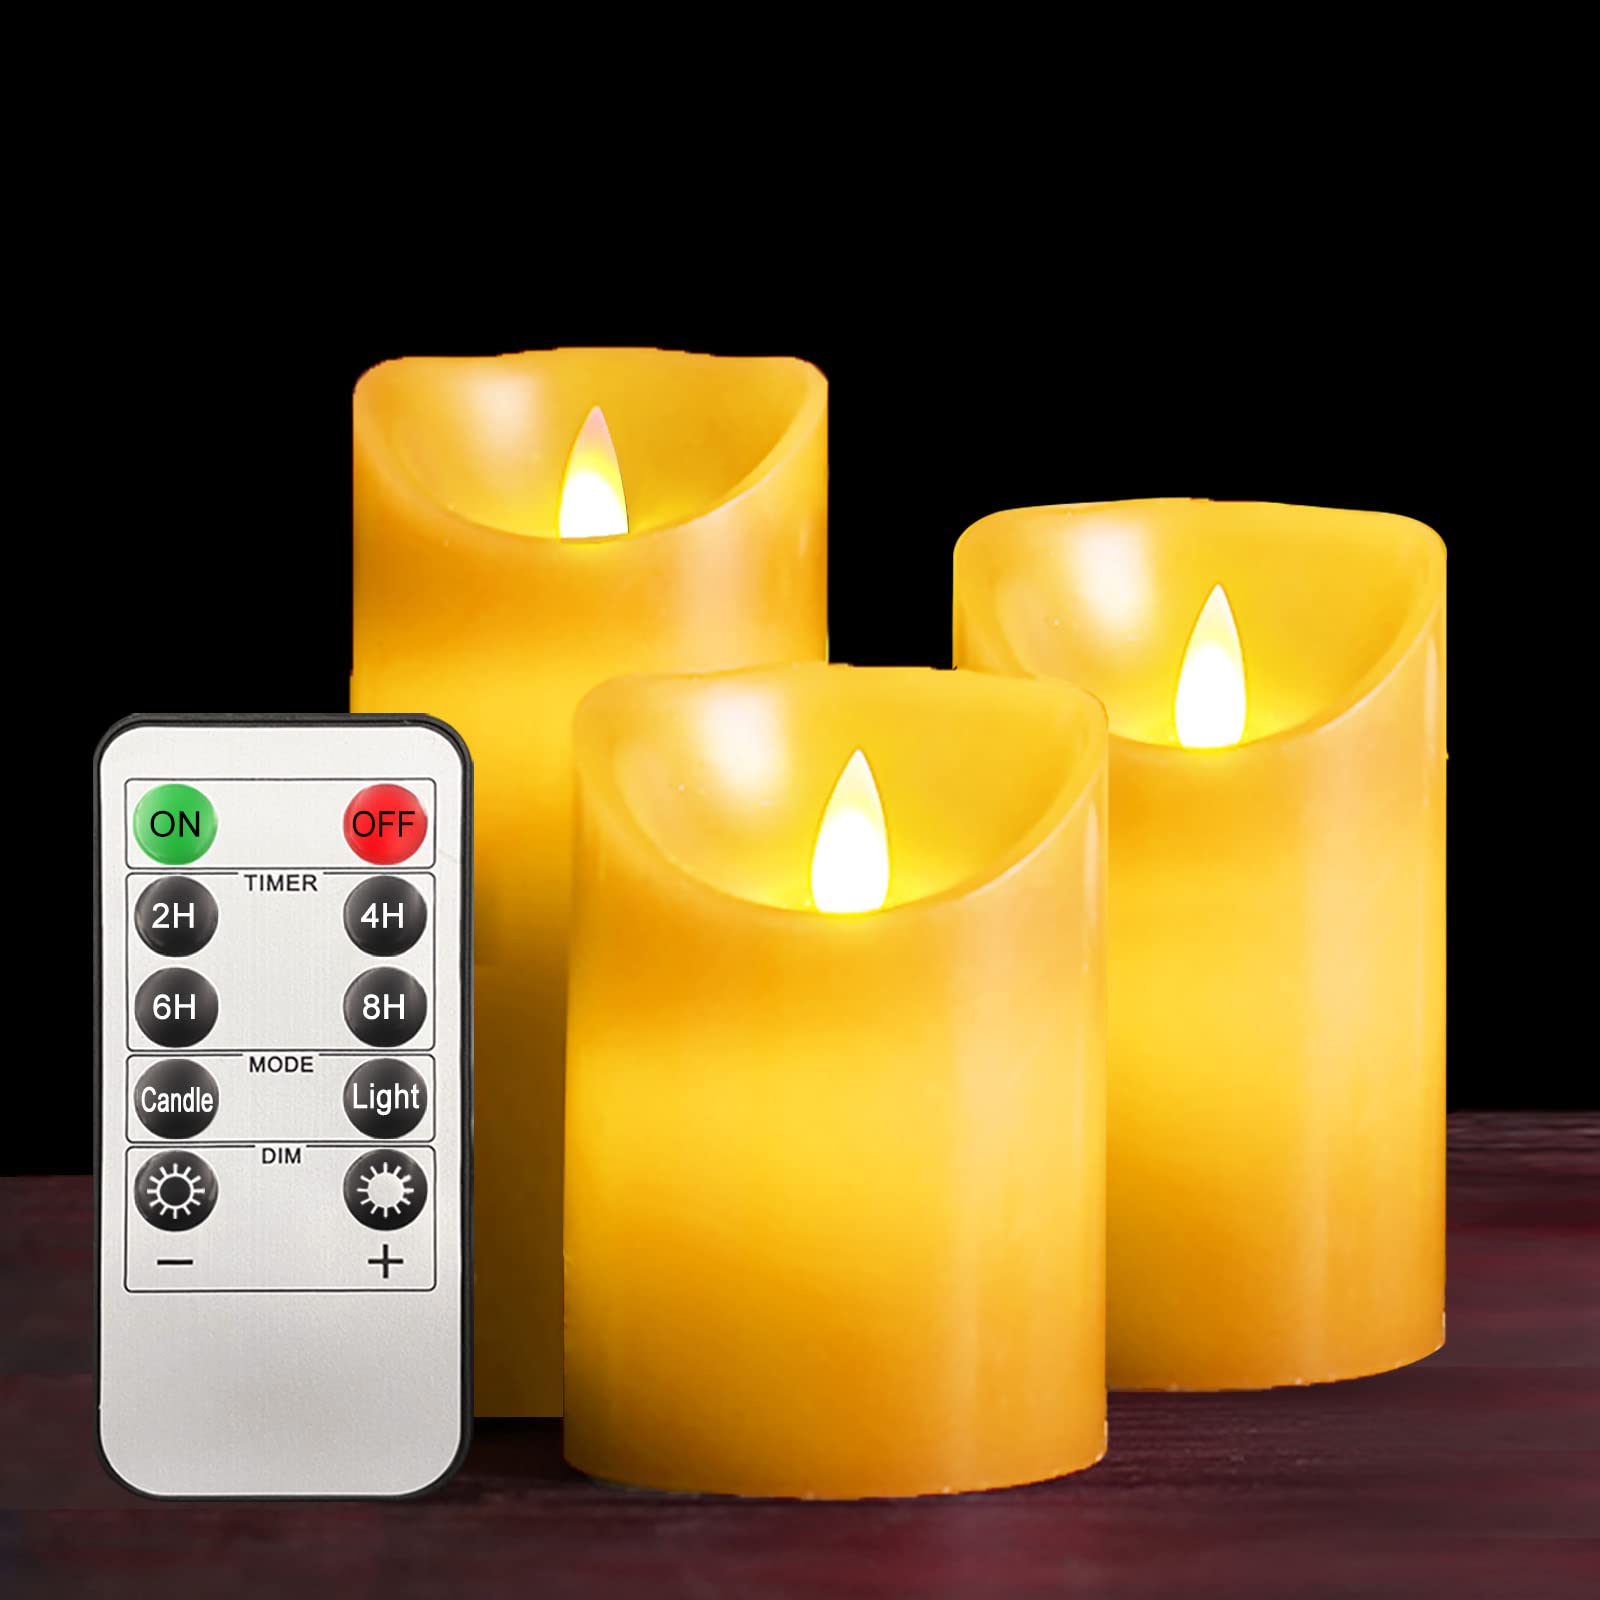 LED Candles Battery Candles Flickering 4" 5" 6" Real Wax with Remote Control Timer，flameless Candles Christmas Candles Ramadan Decorations Pack of 3 (Ivory)